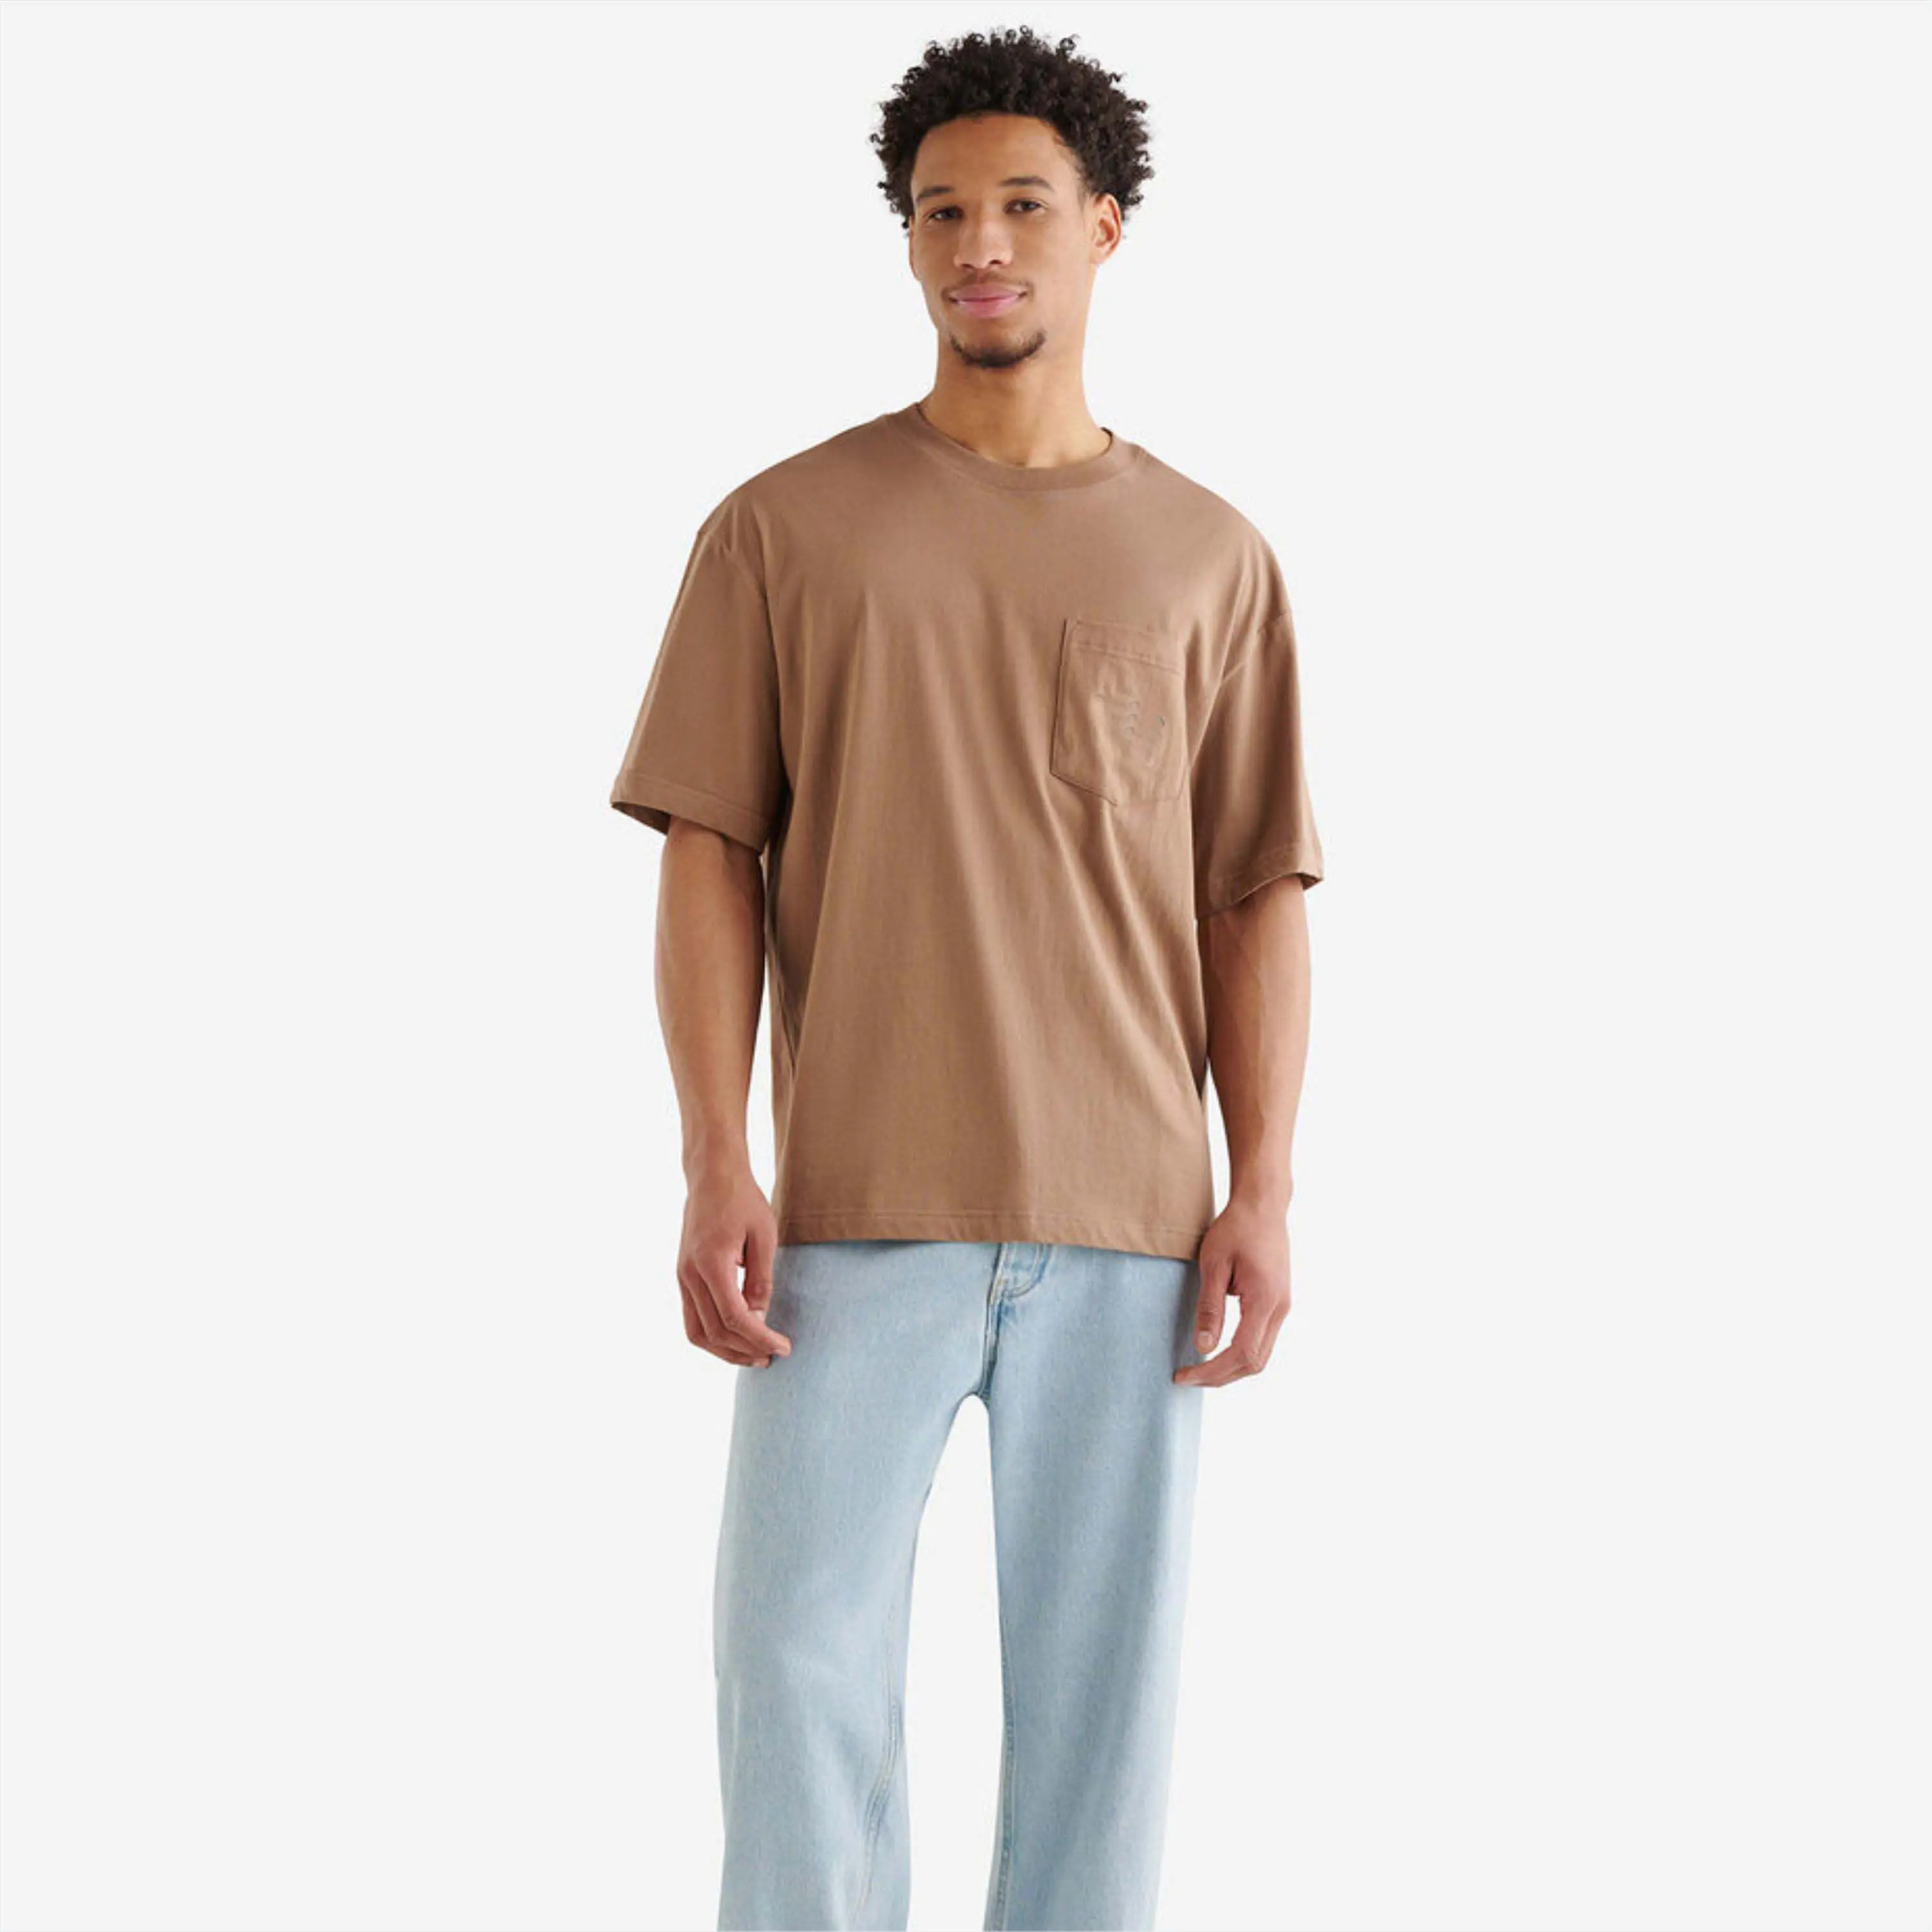 Classic Men's Cotton T-Shirt with Pocket: Soft and Comfortable, Perfect for Casual Everyday Wear, Available in Multiple Colors